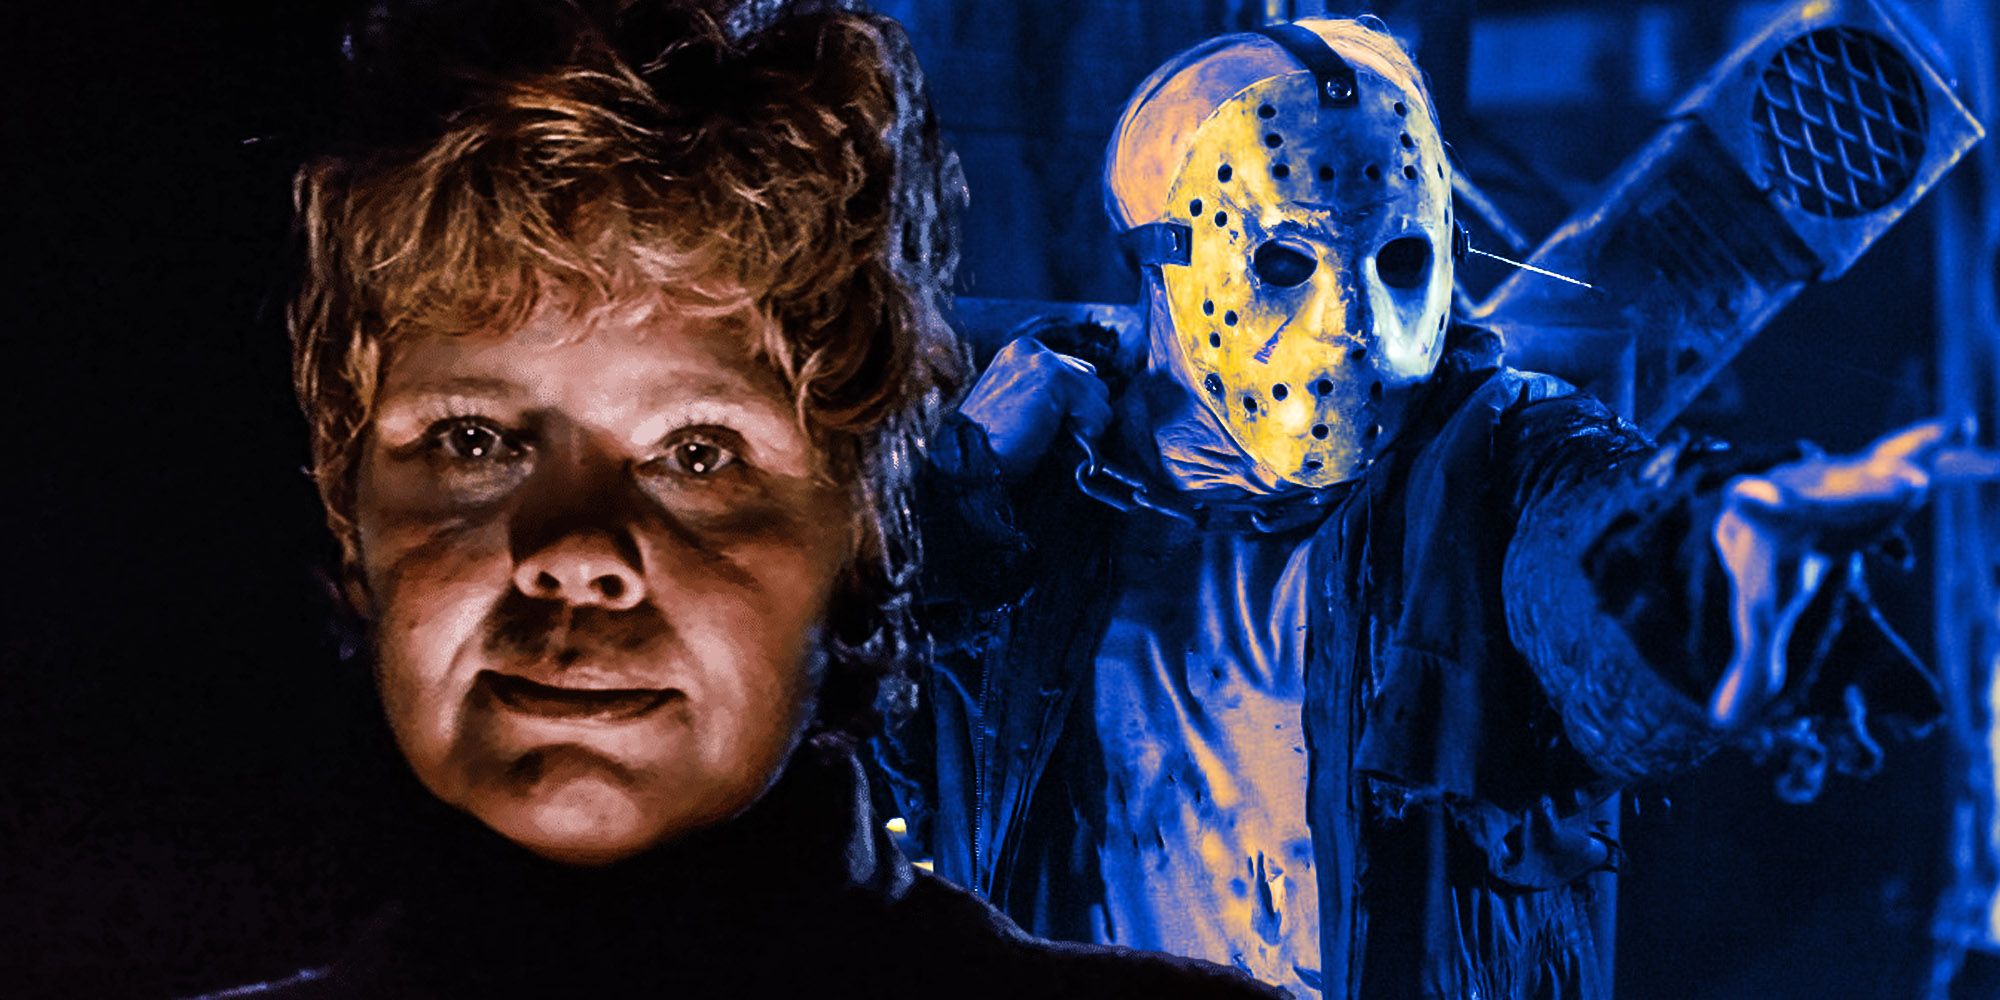 Jason voorhees was not supposed to be the villain of Friday the 13th pamela voorhees